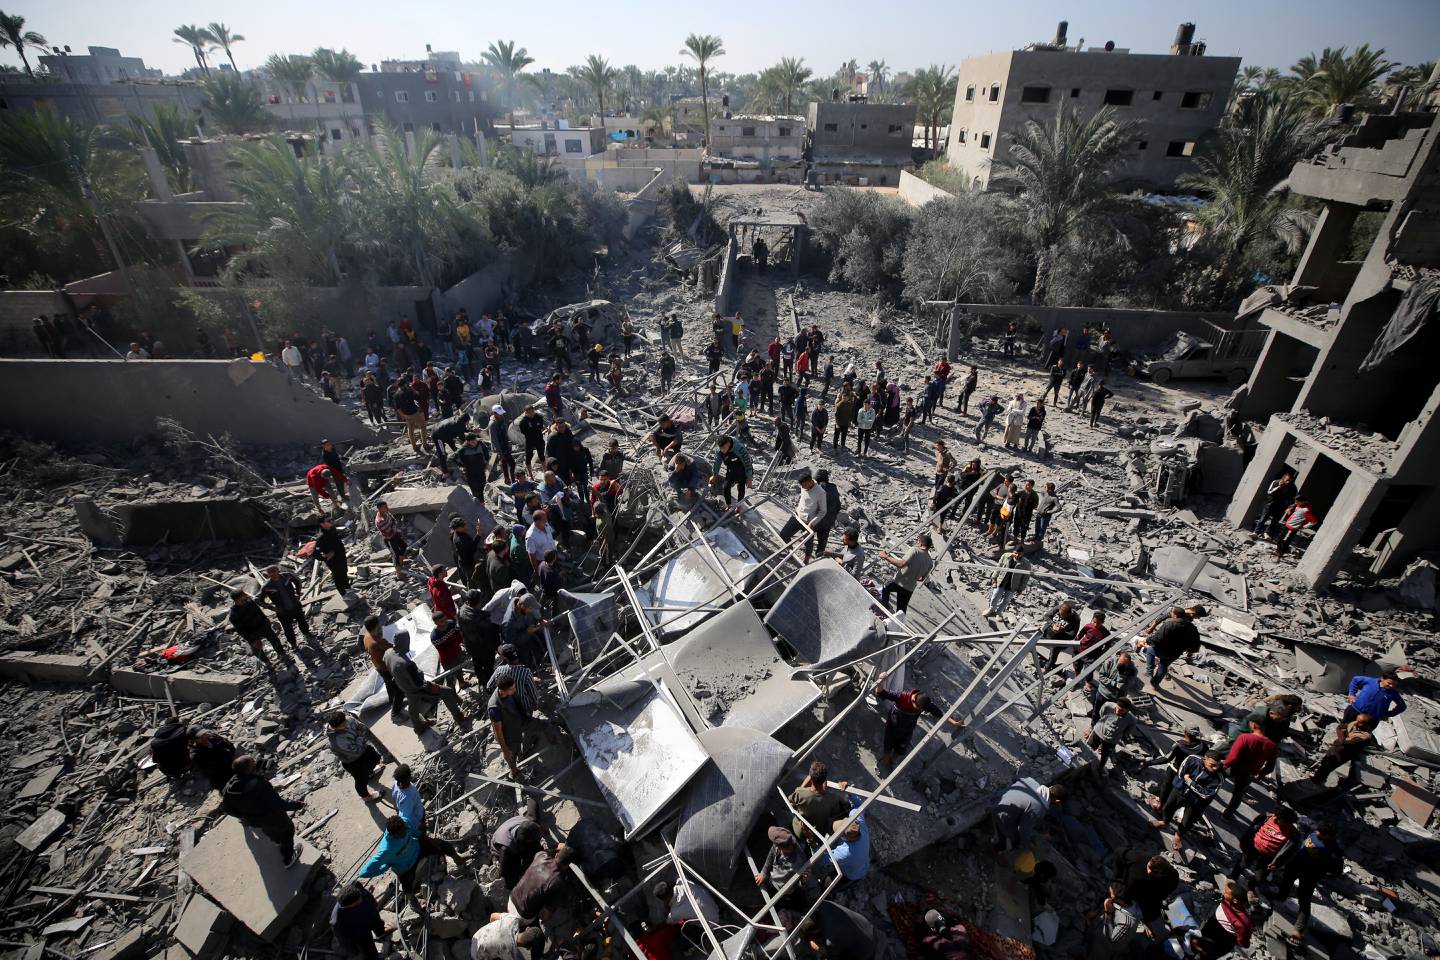 Palestinians Search For Survivors In The Rubble Of Buildings After An Israeli Attack On Al-Maghazi Refugee Camp.